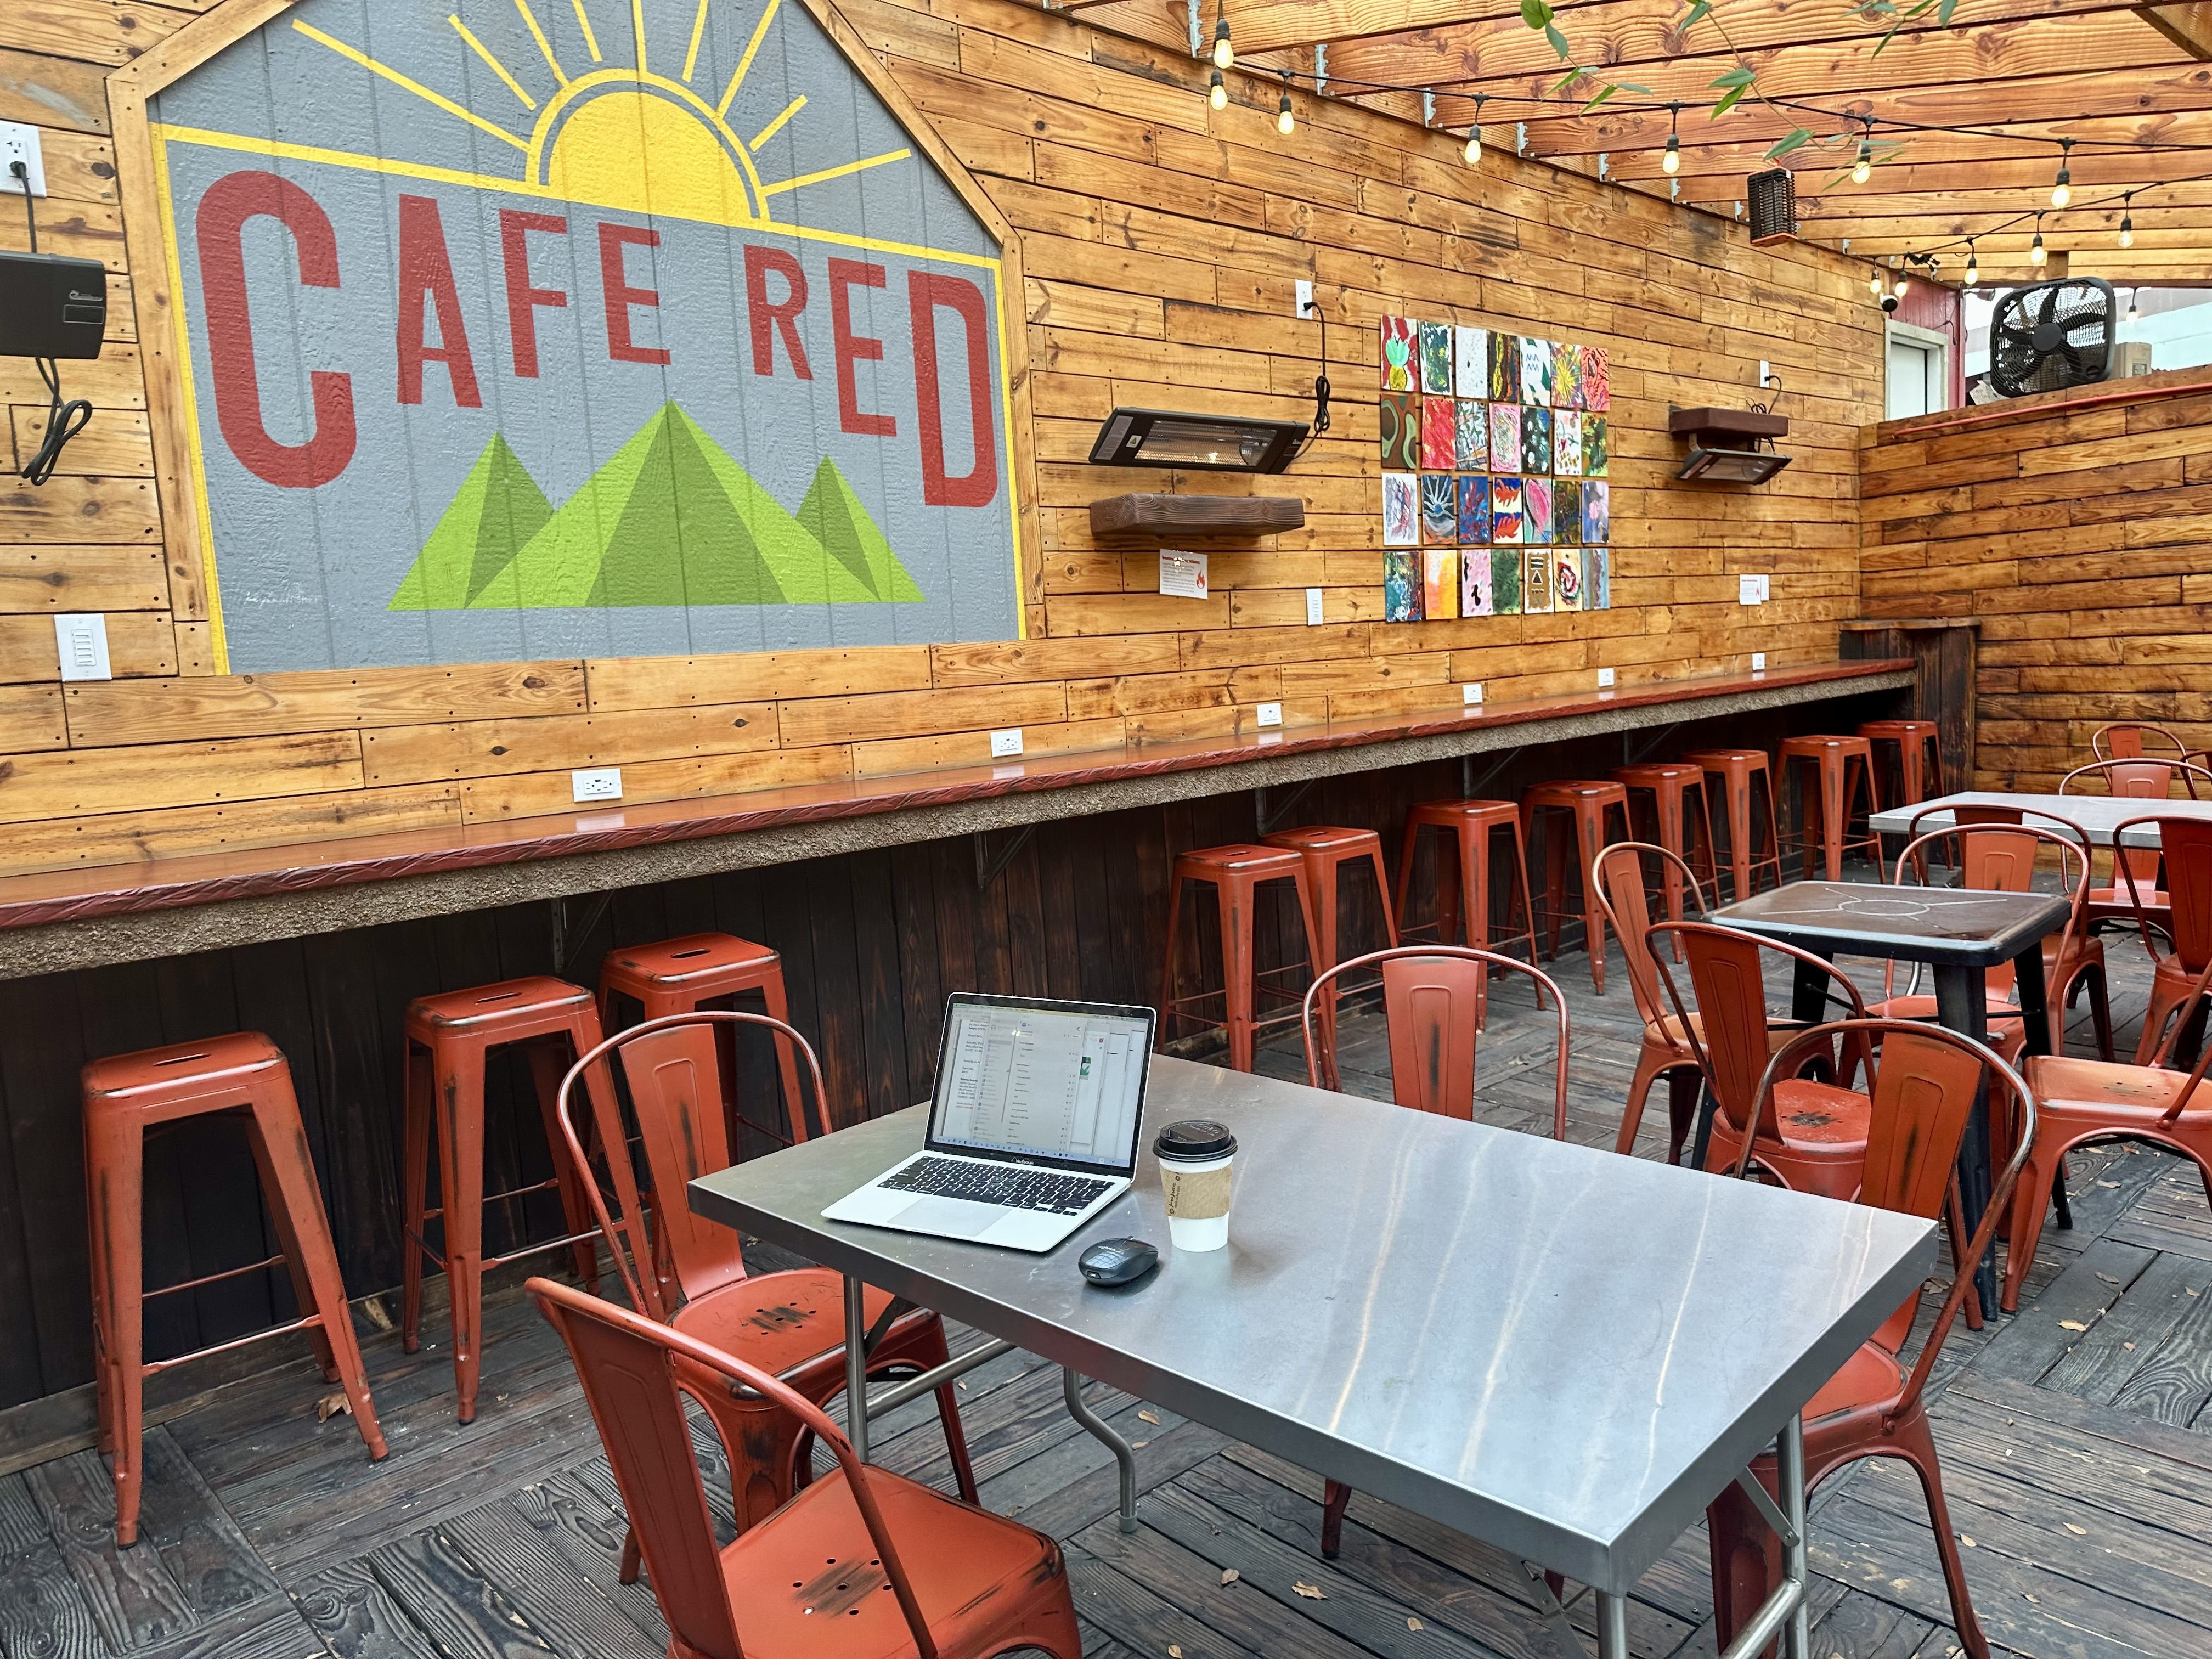 A wood paneled wall with a painting that says "Cafe Red" above barstool seating with outlets, alongside a courtyard with metal tables and red chairs and a laptop sitting on one table.